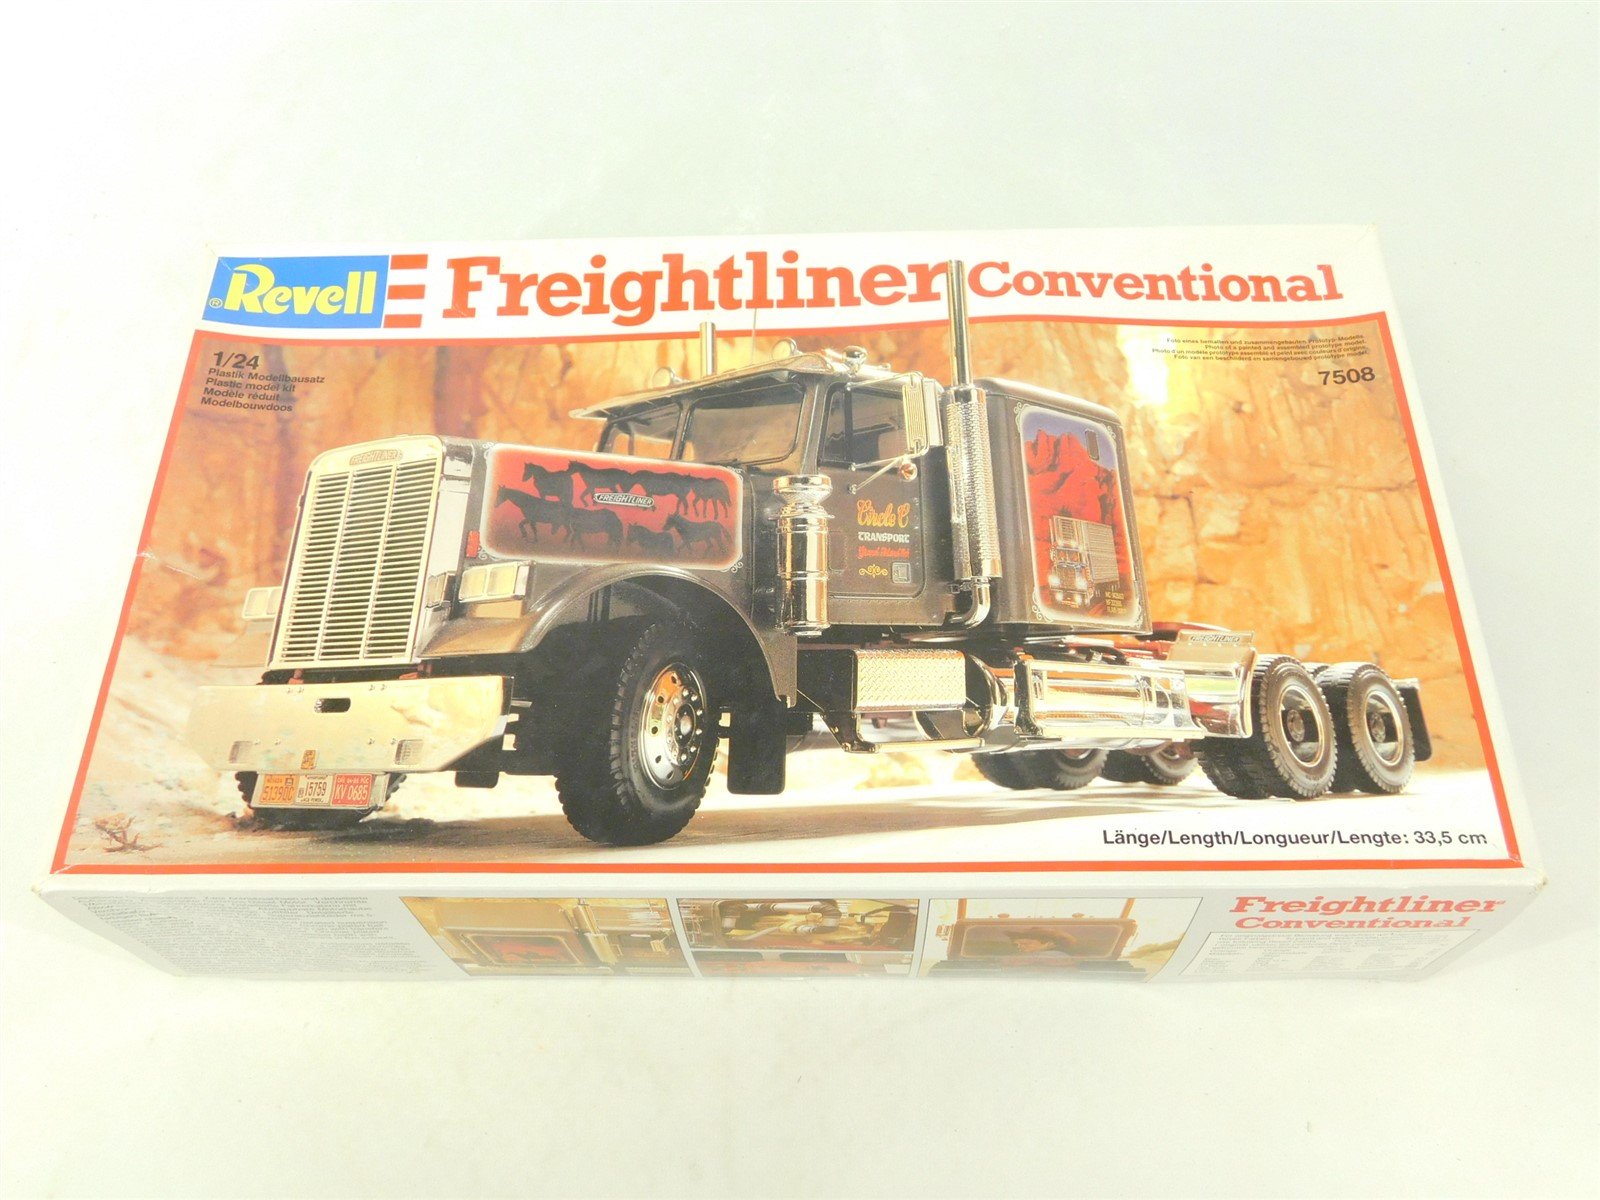 1:24 Scale Revell 7508 Freightliner Conventional Truck Kit